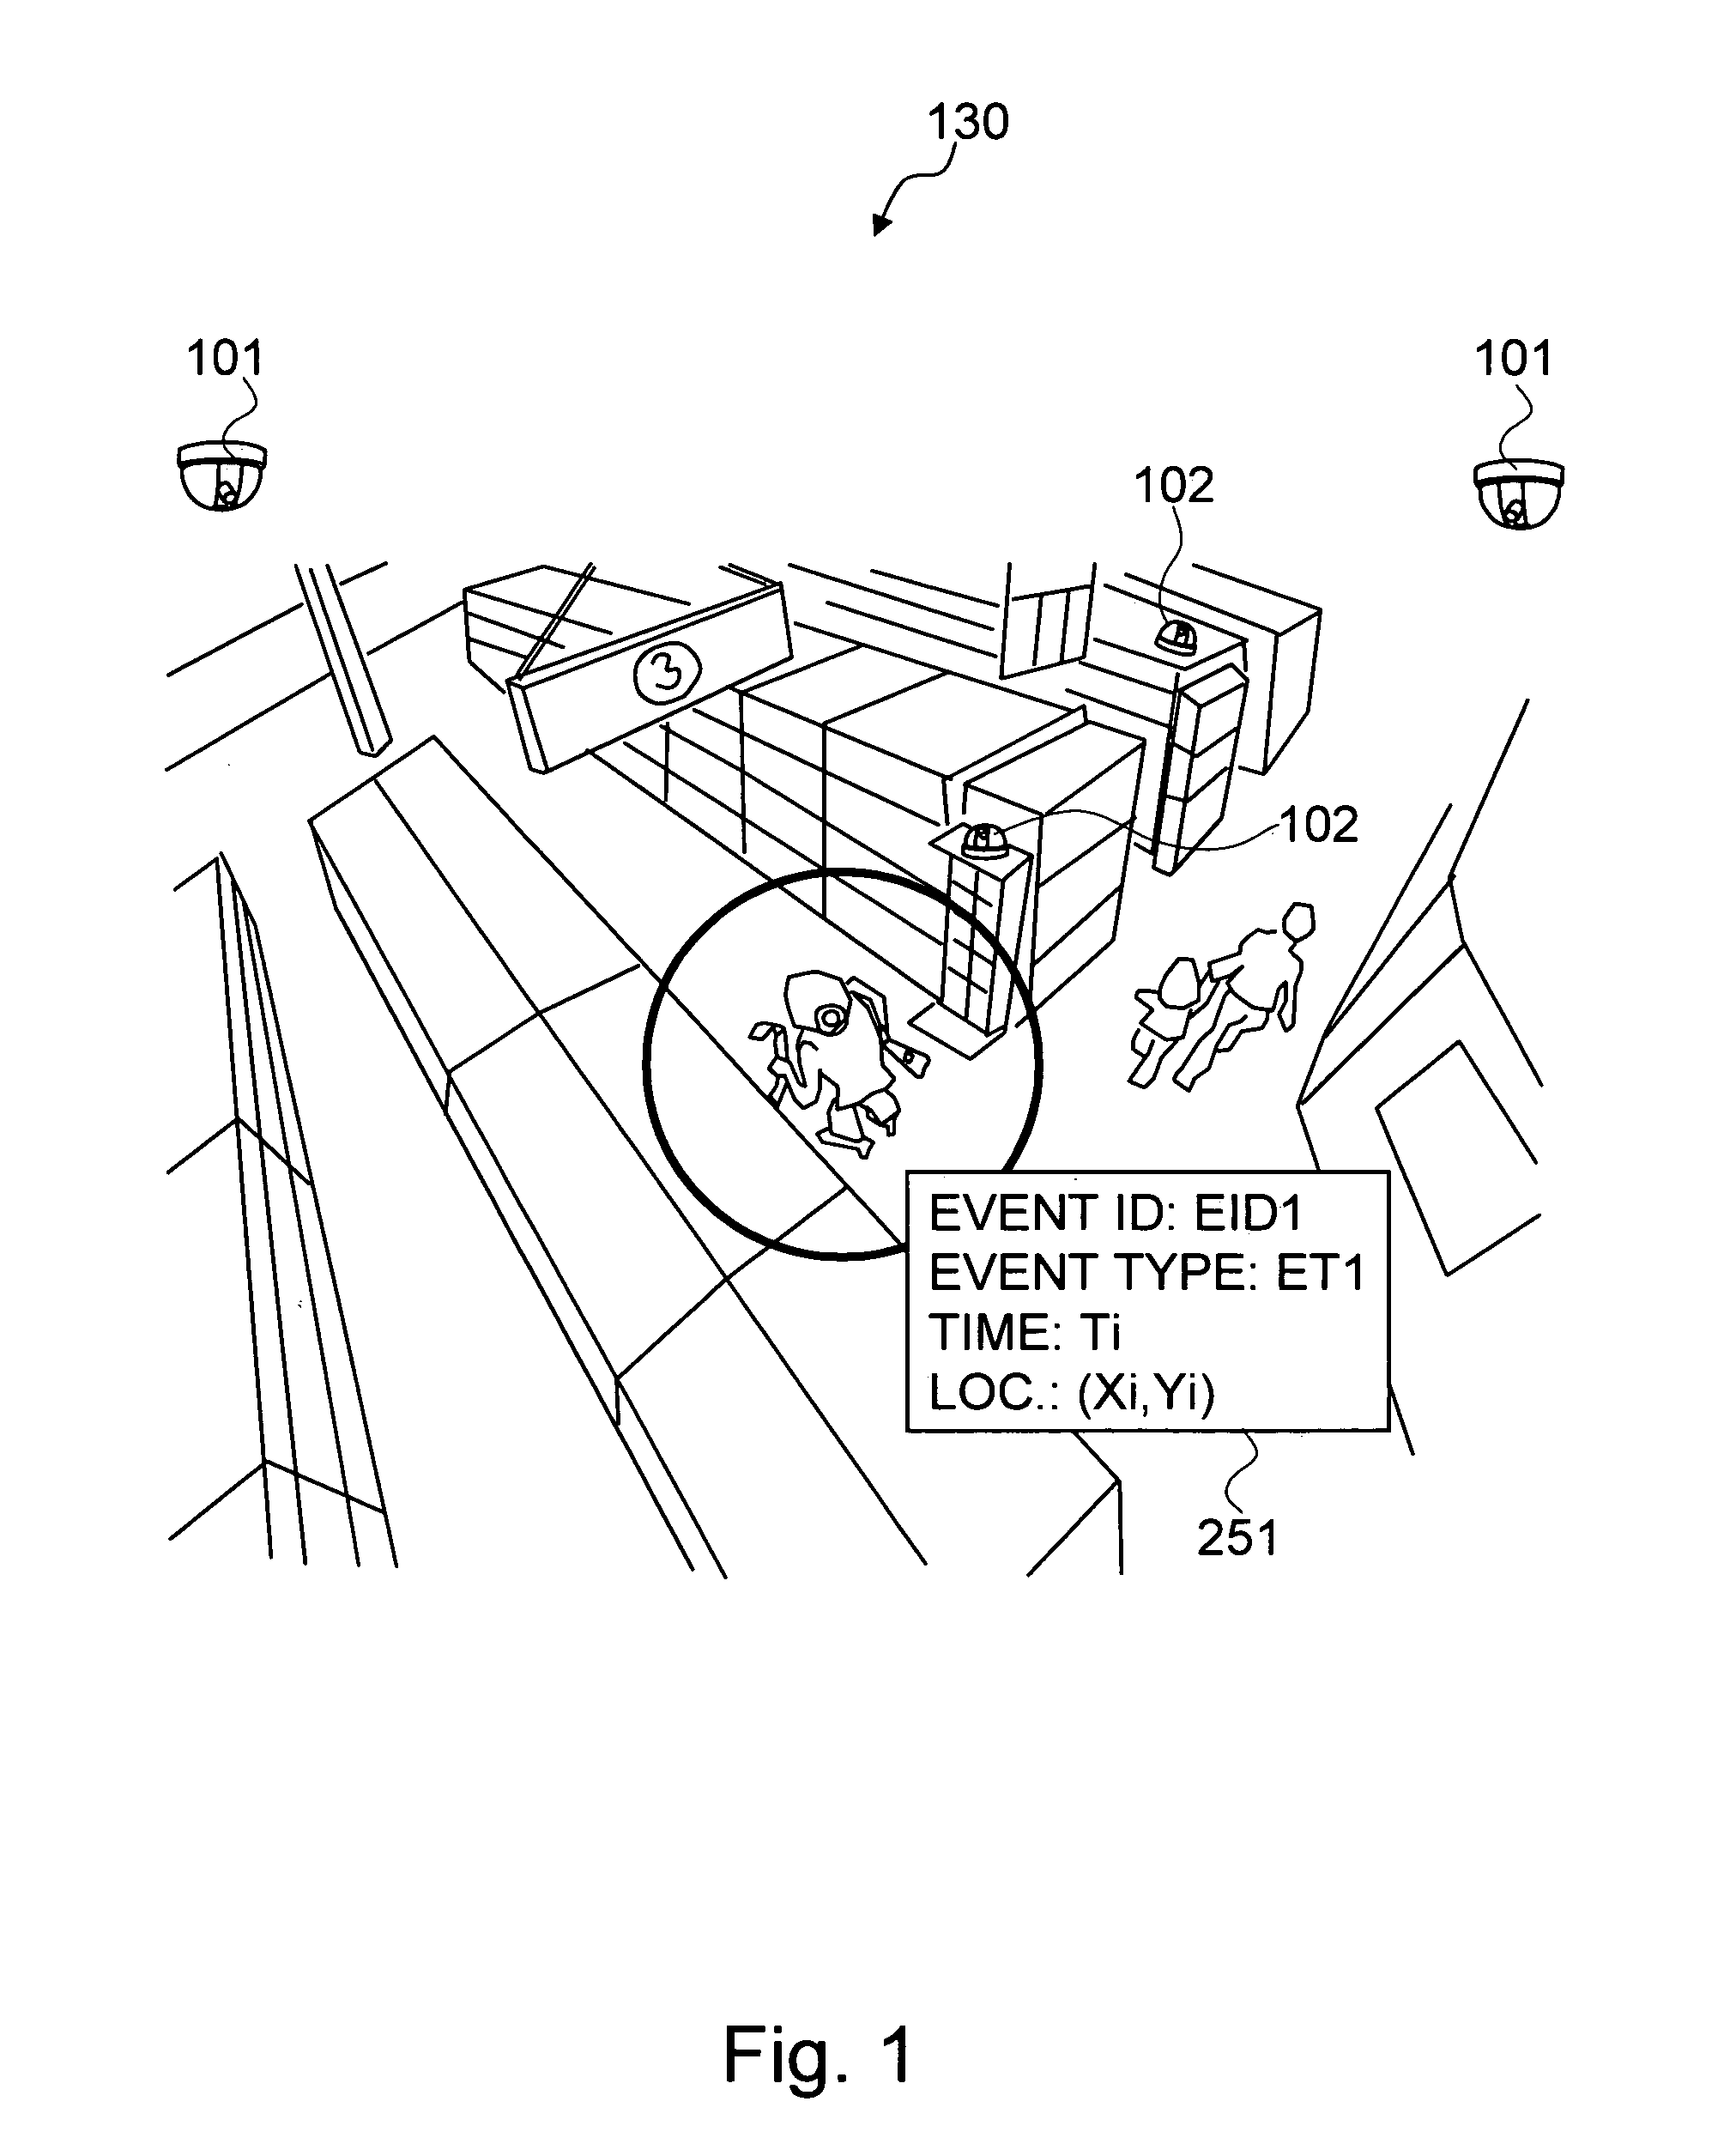 Method and system for optimizing the observation and annotation of complex human behavior from video sources